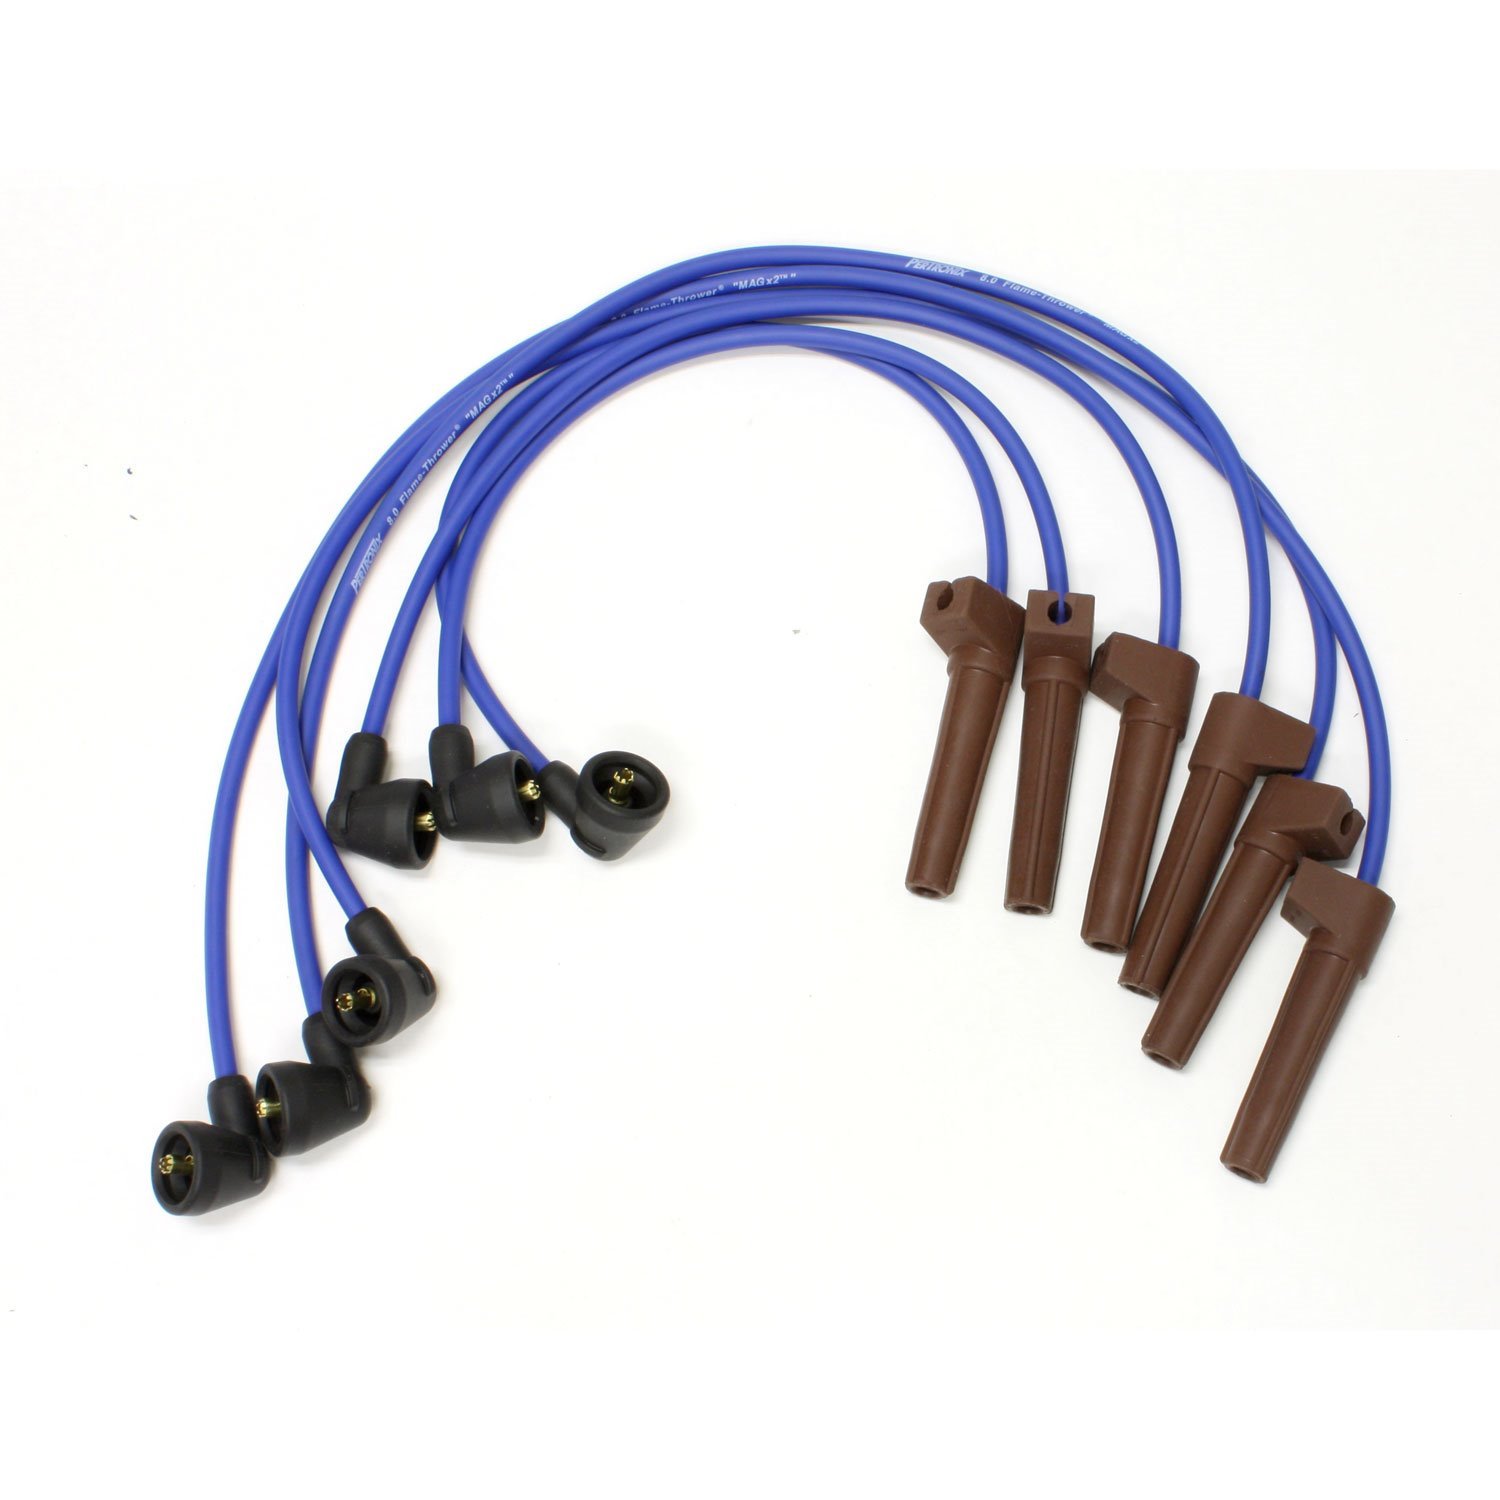 PerTronix 806326 Flame-Thrower Spark Plug Wires 6 cyl Ford Custom Fit Blue